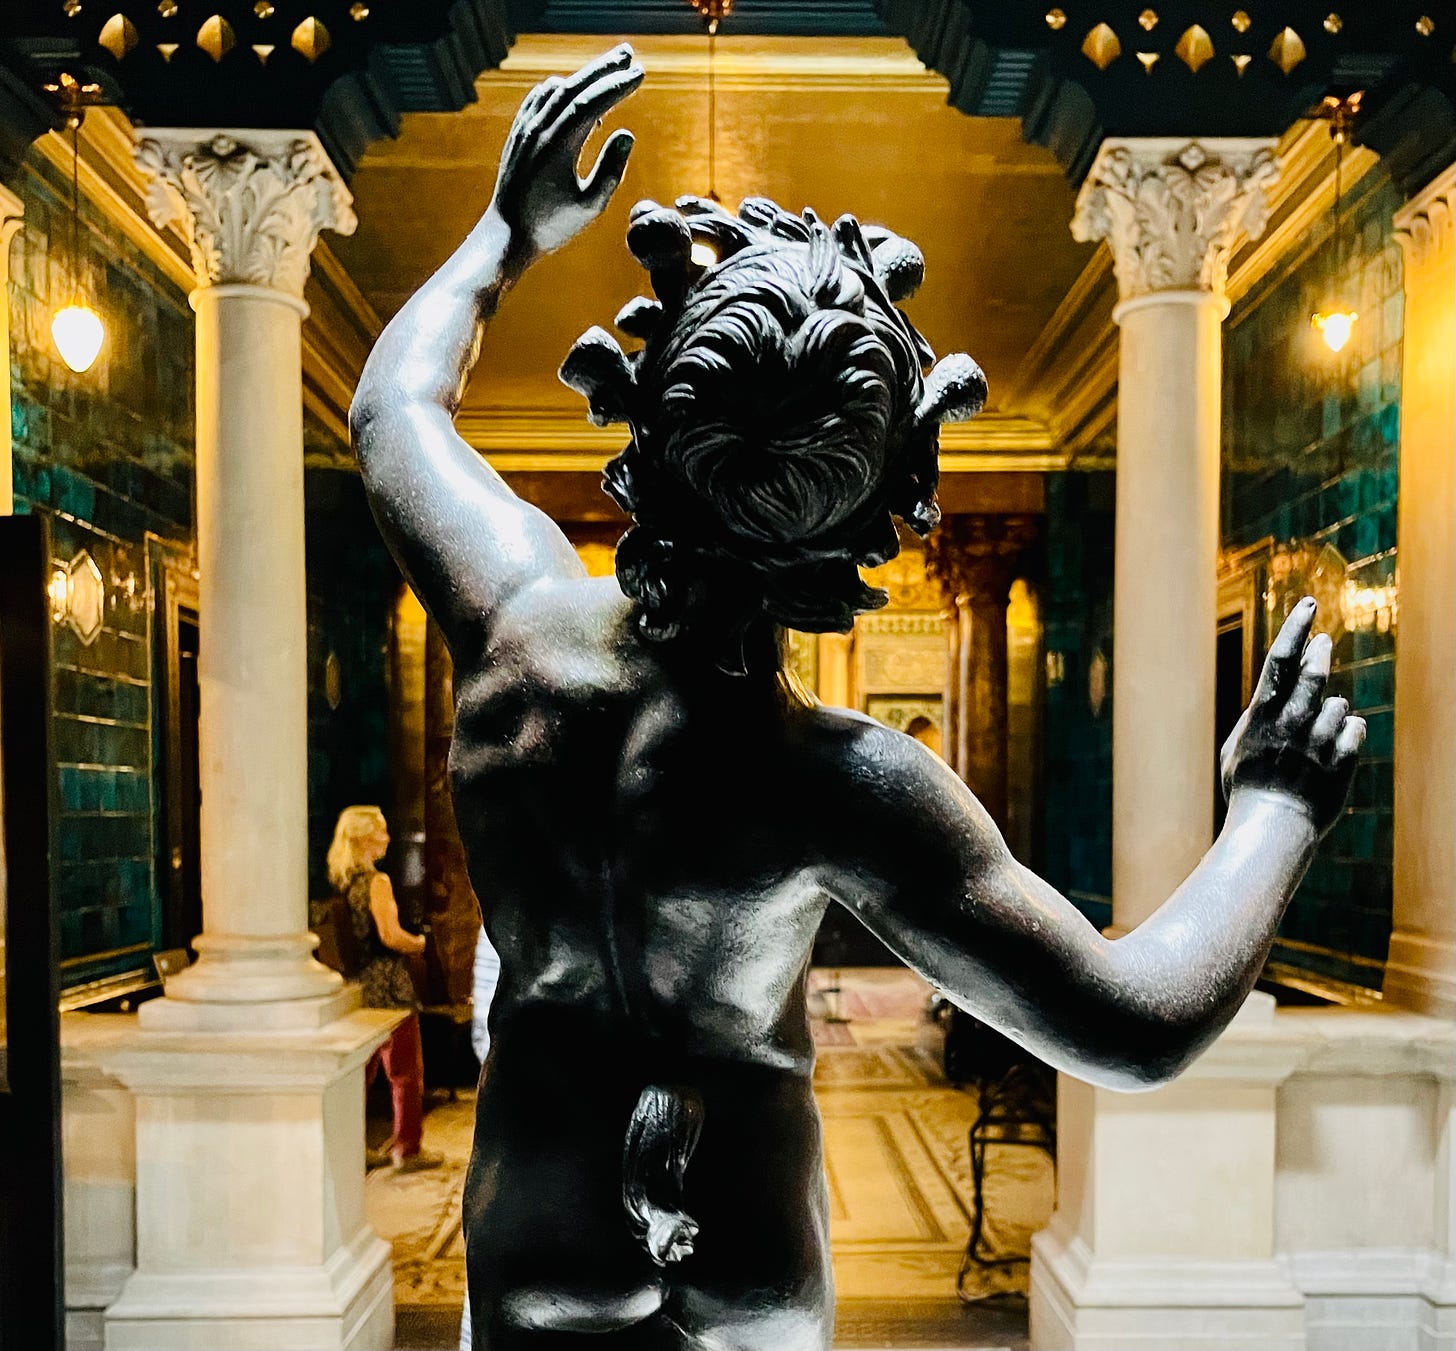 the statue of the Greek hero Narcissus